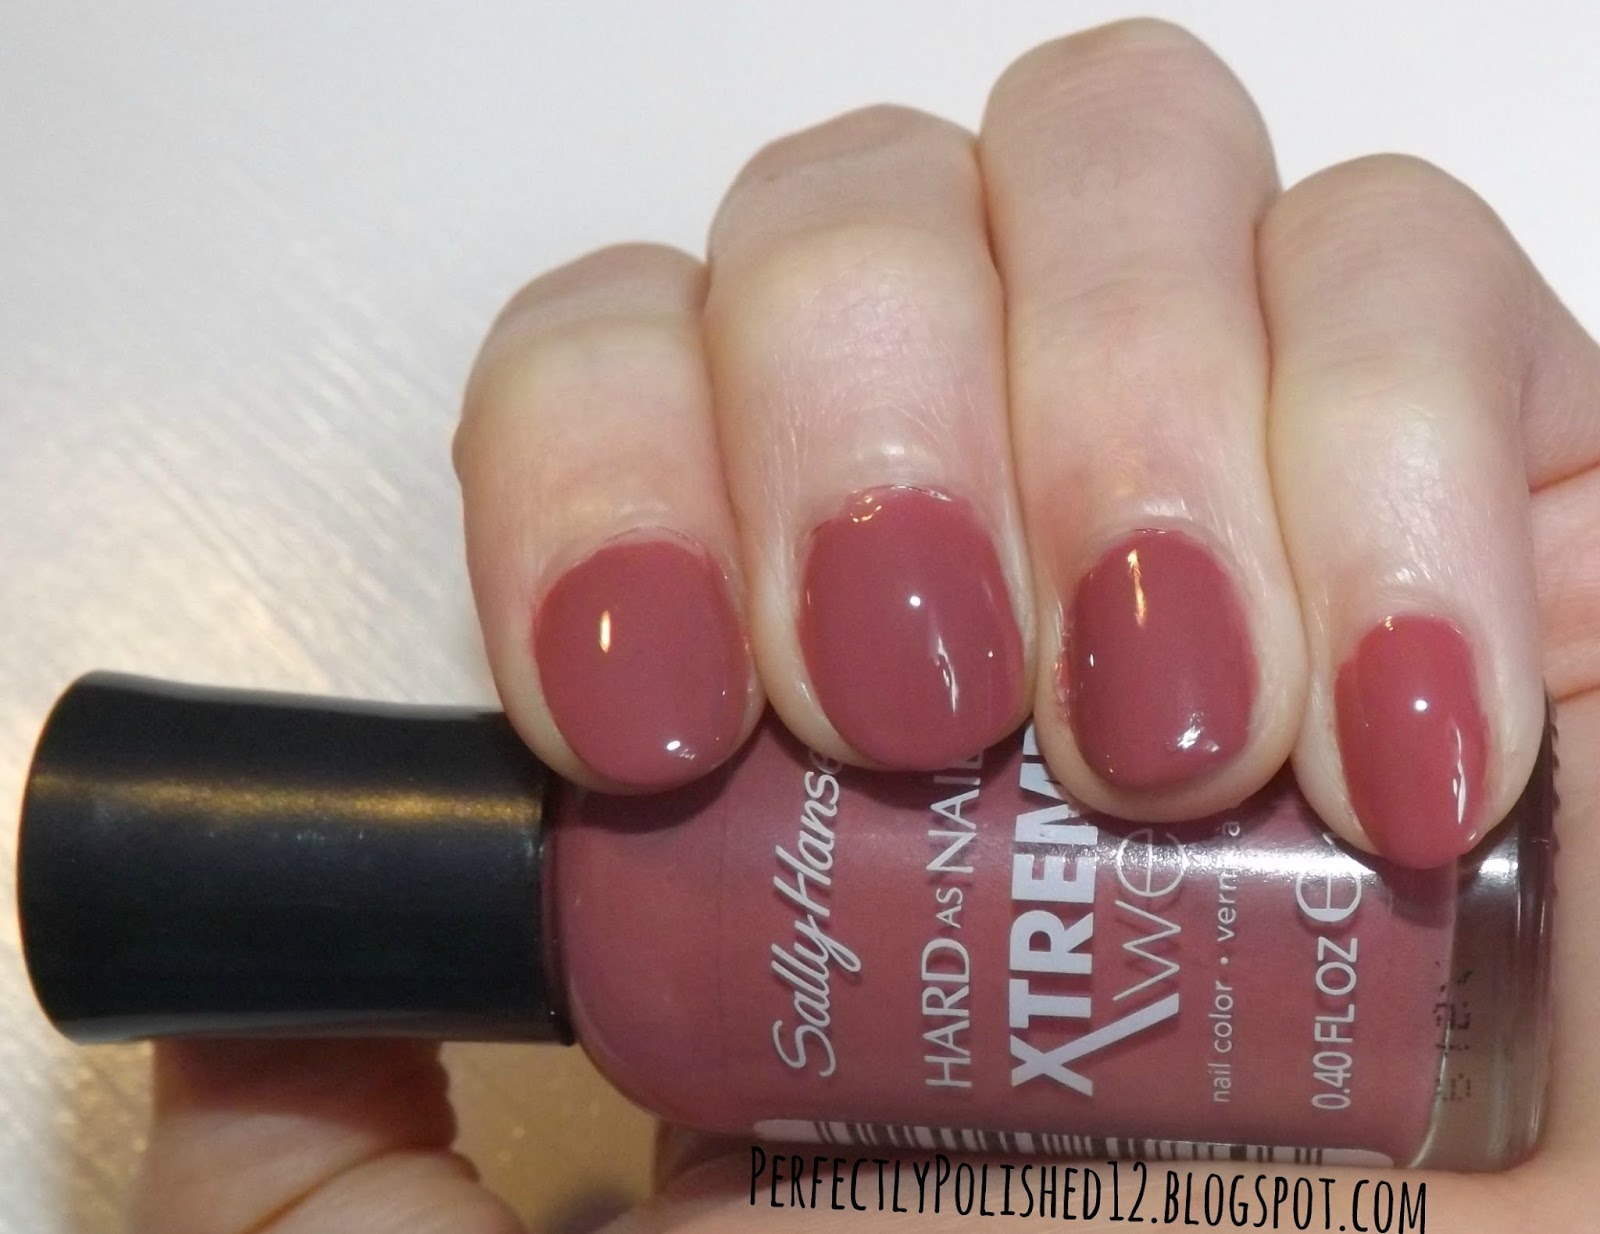 3. Sally Hansen To Be Perfectly Honest Nail Color - wide 3